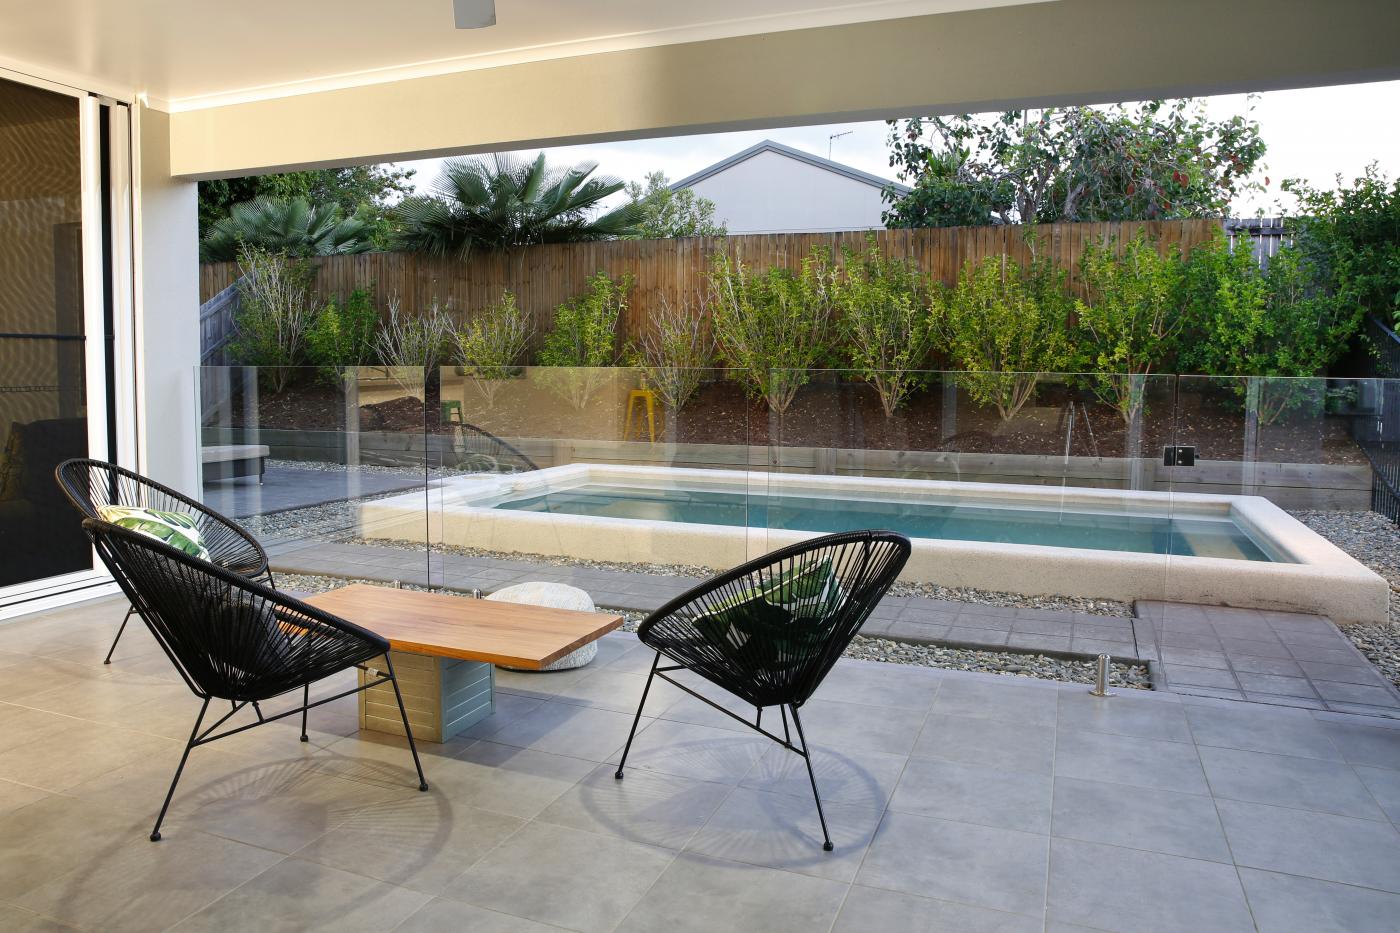 A tiled patio connecting living, kitchen and alfresco dining